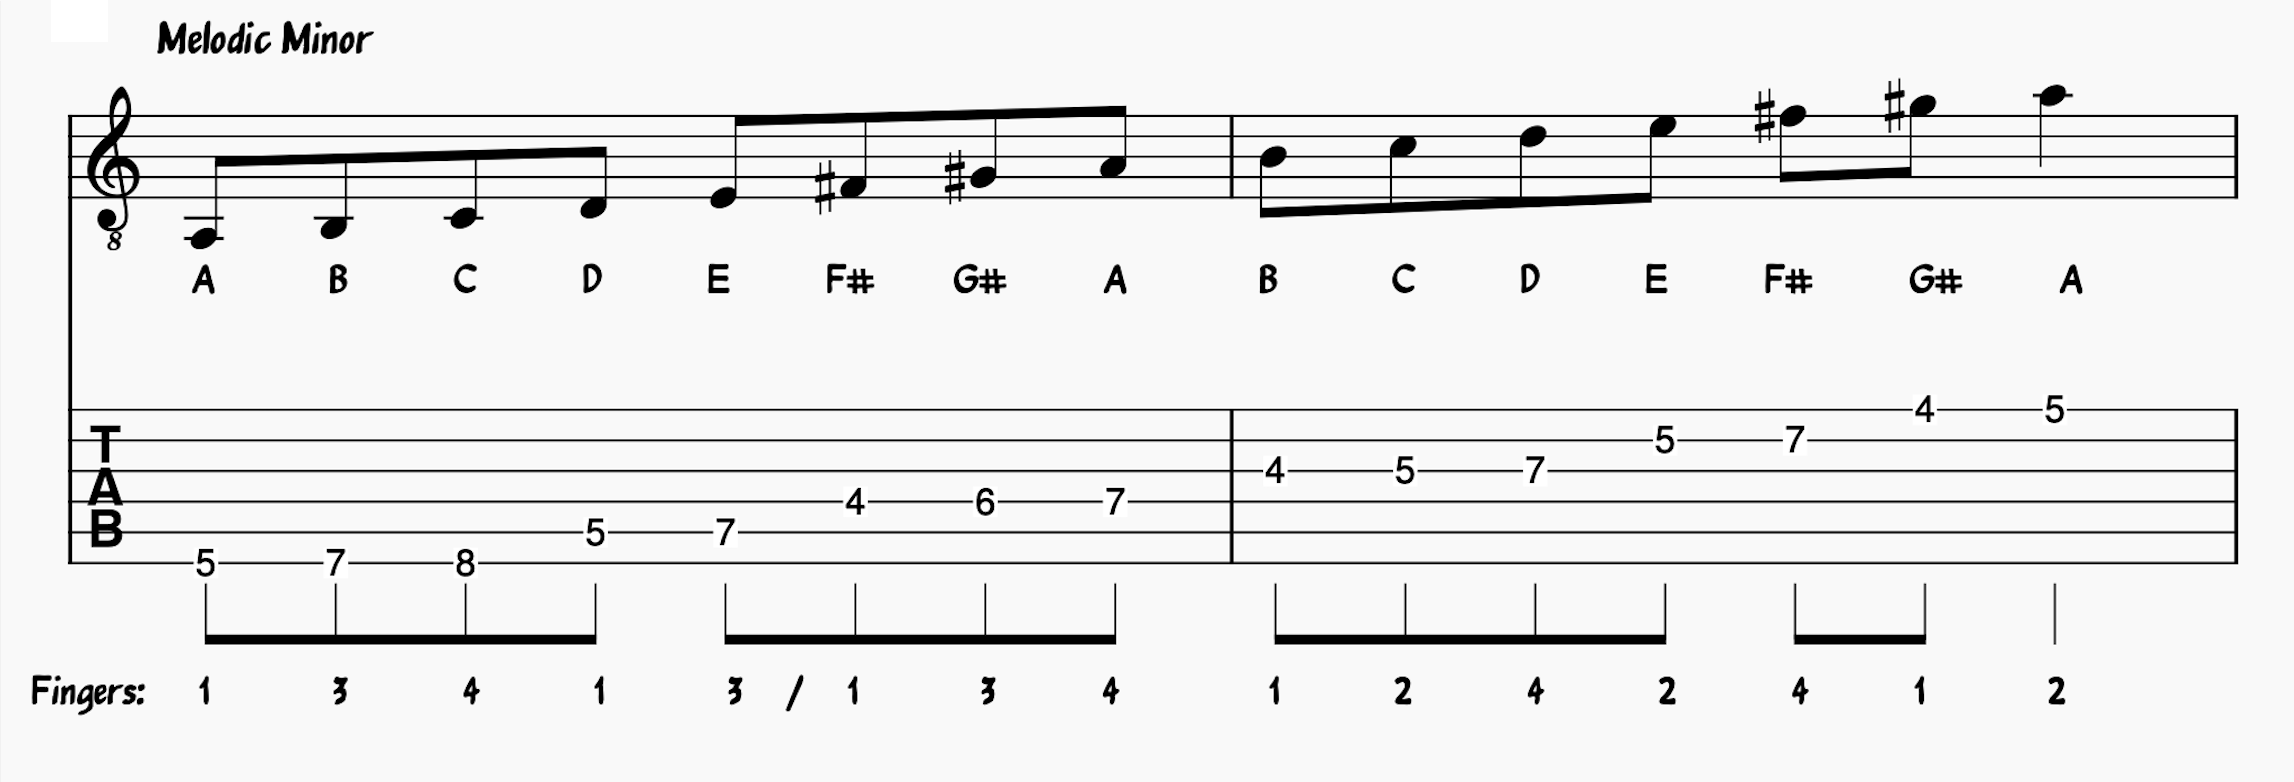 Melodic minor scale on Guitar